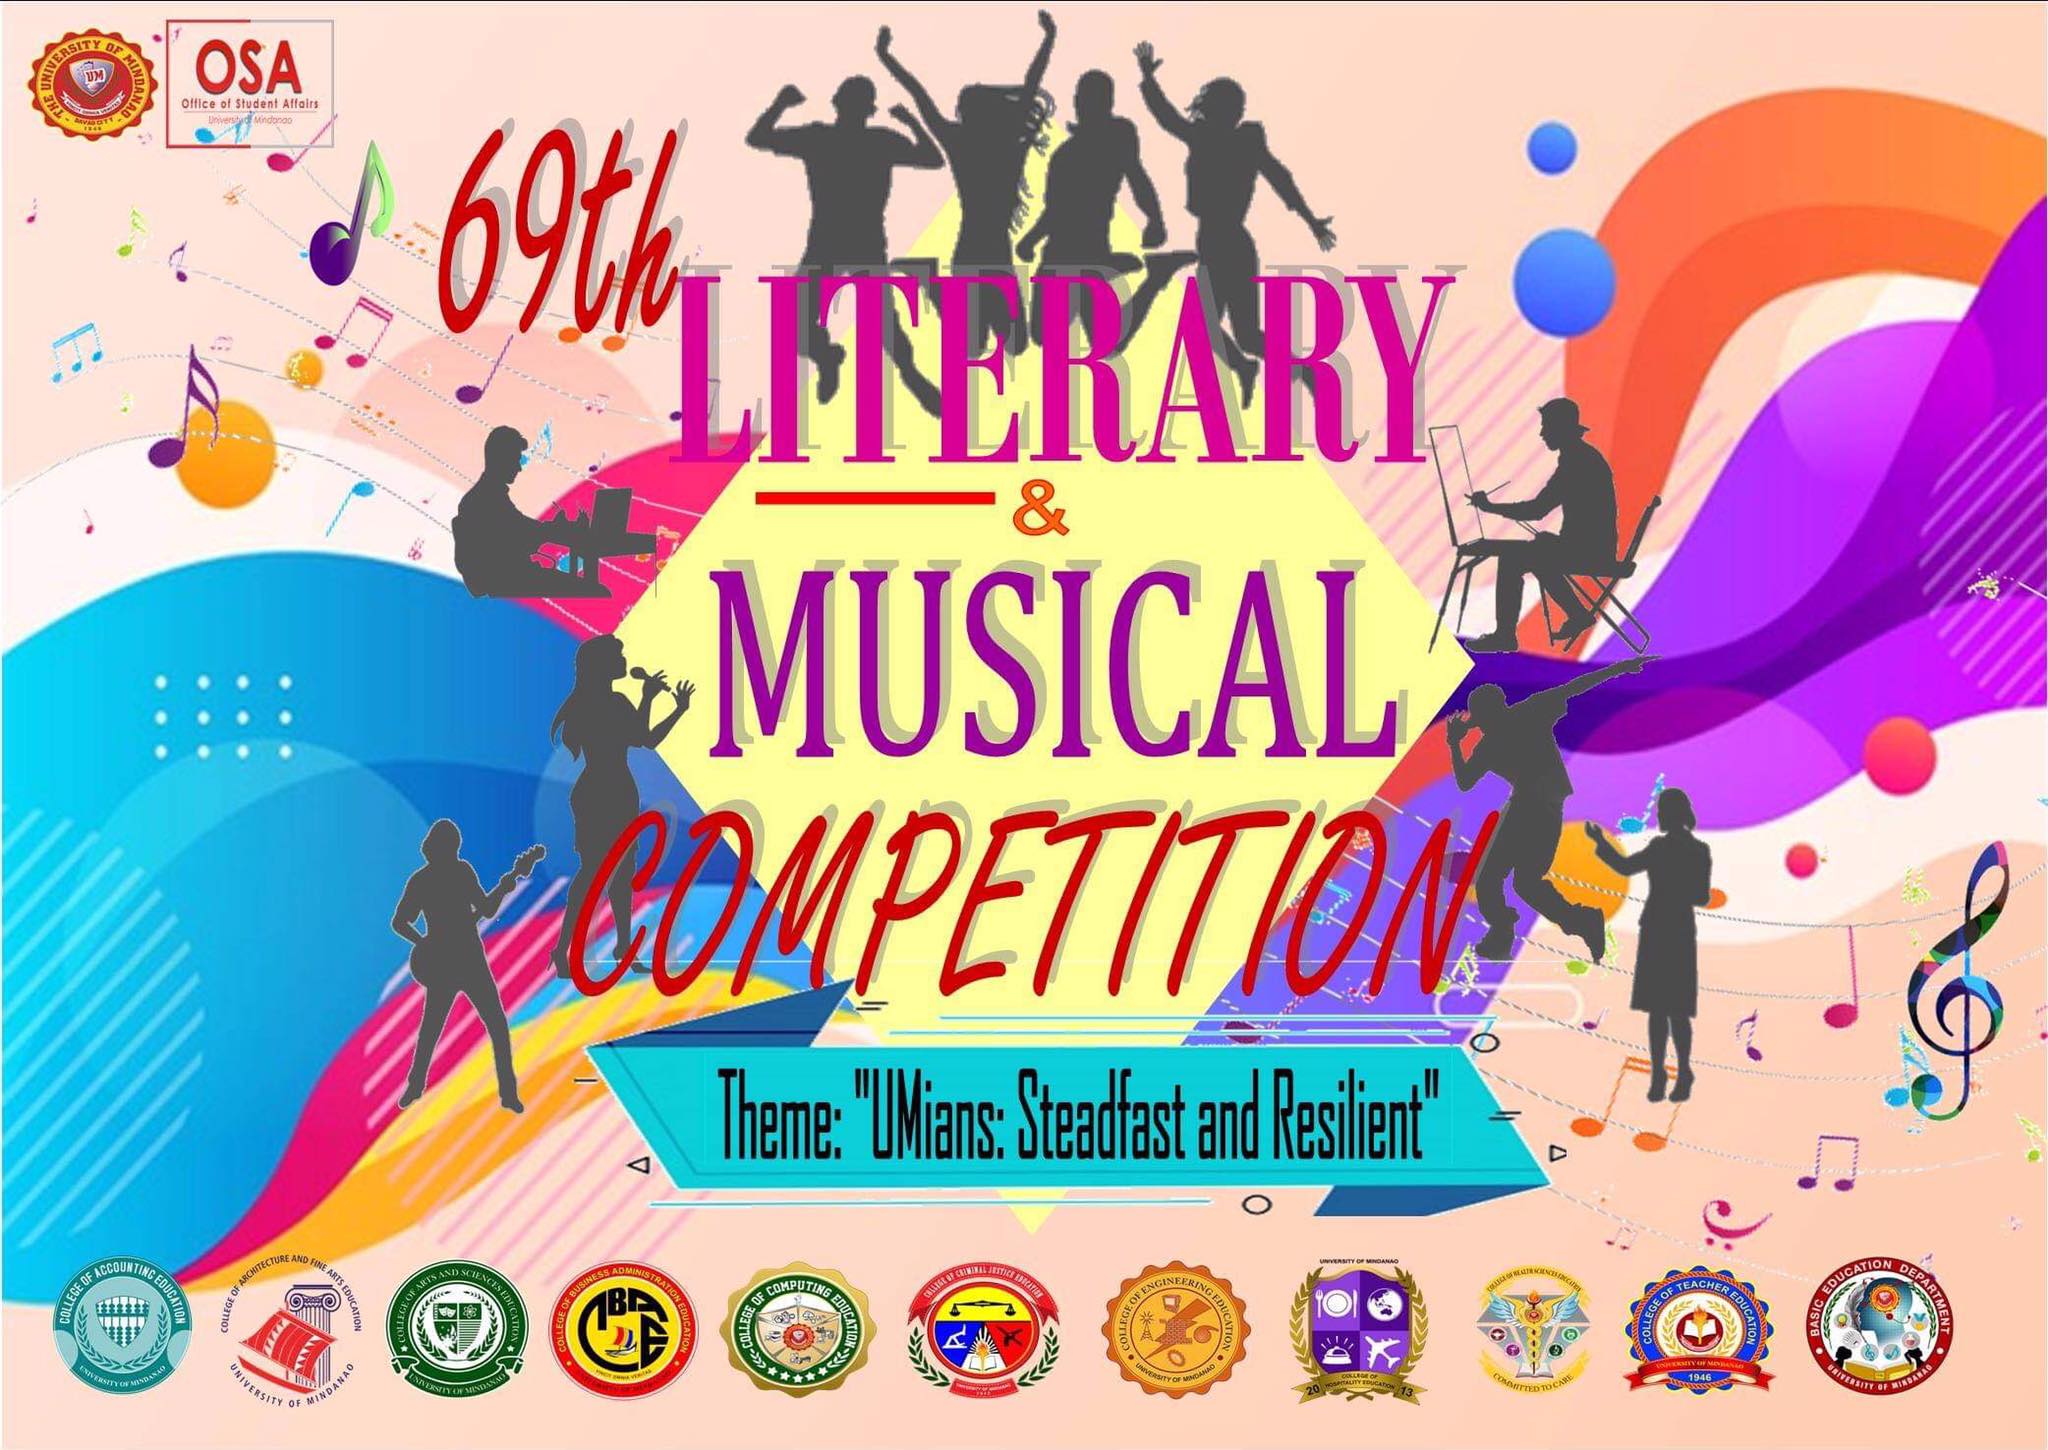 The 69th Literary Musical Festival